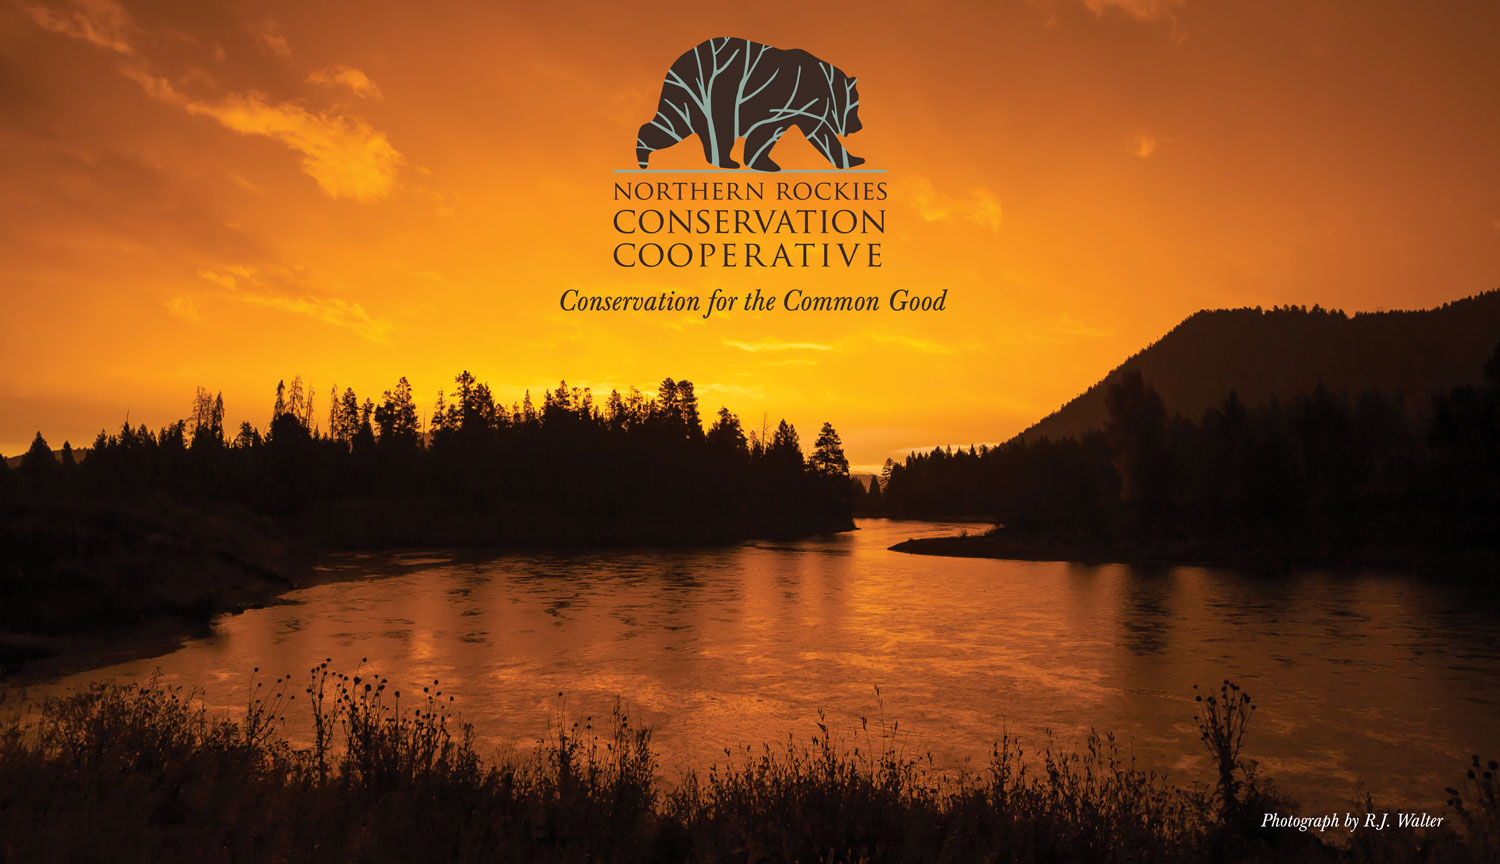 Northern Rockies Conservation Cooperative